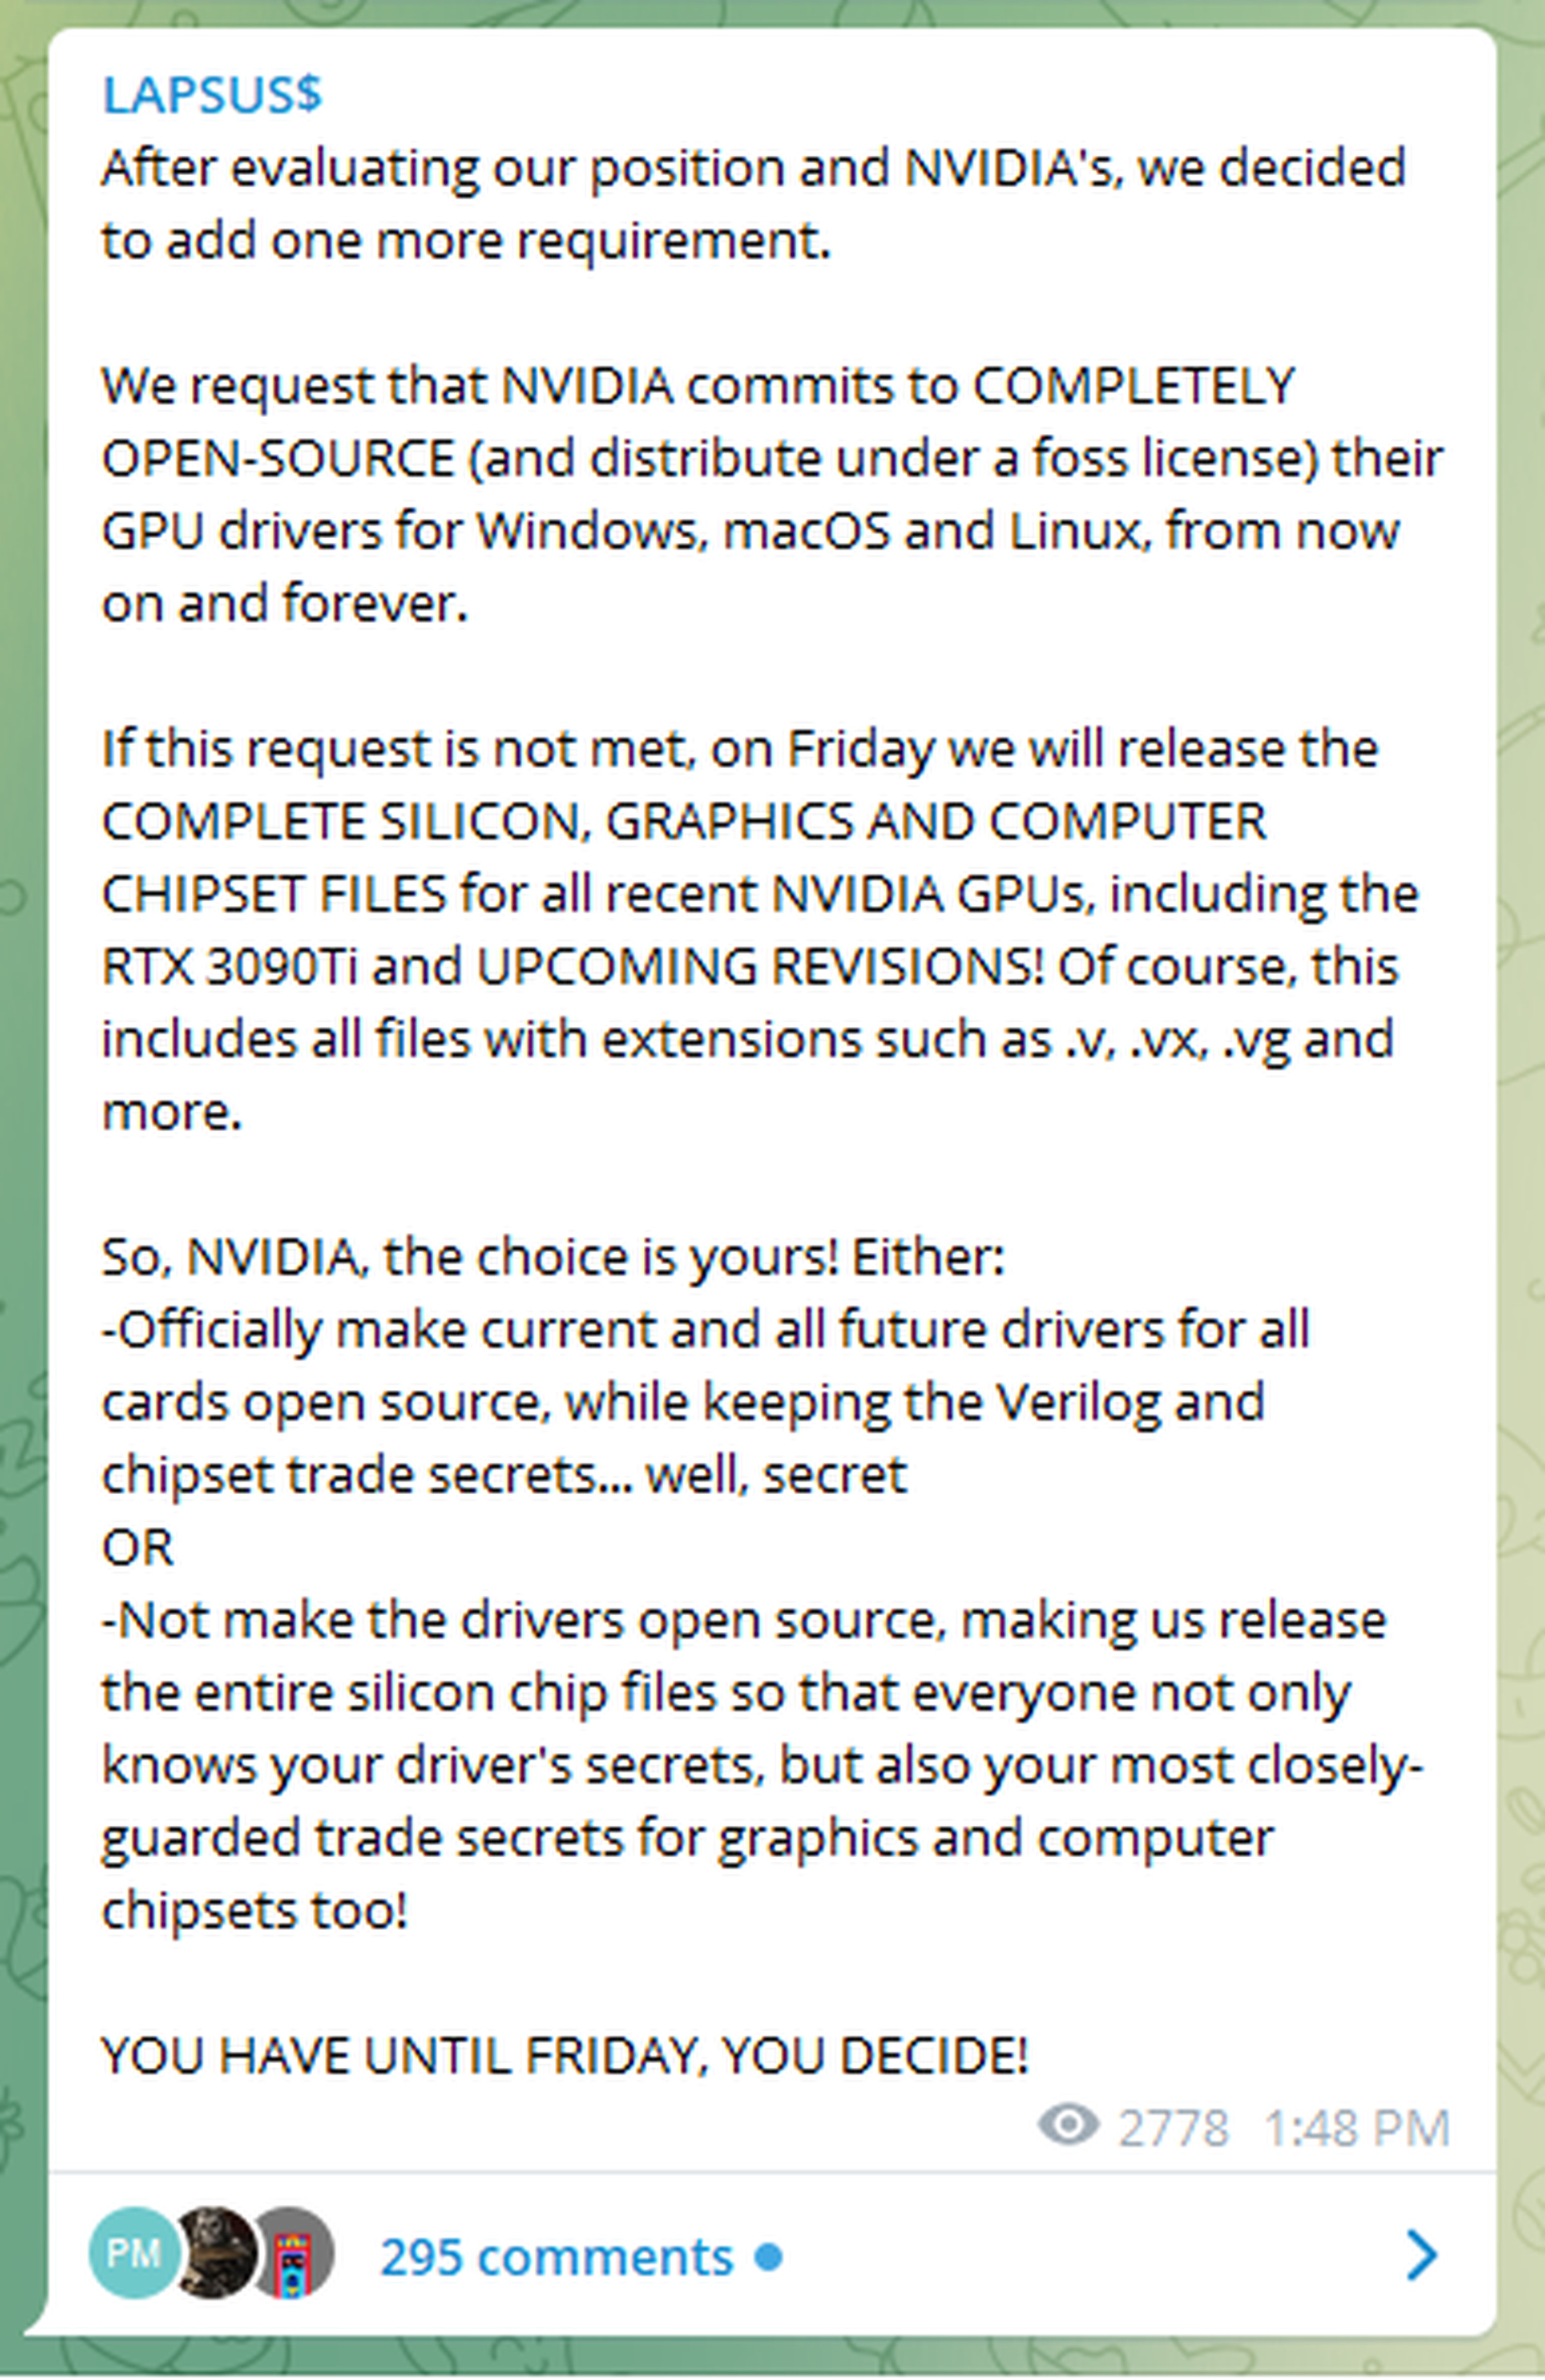 A message from the hacking group, updating its demands to Nvidia.